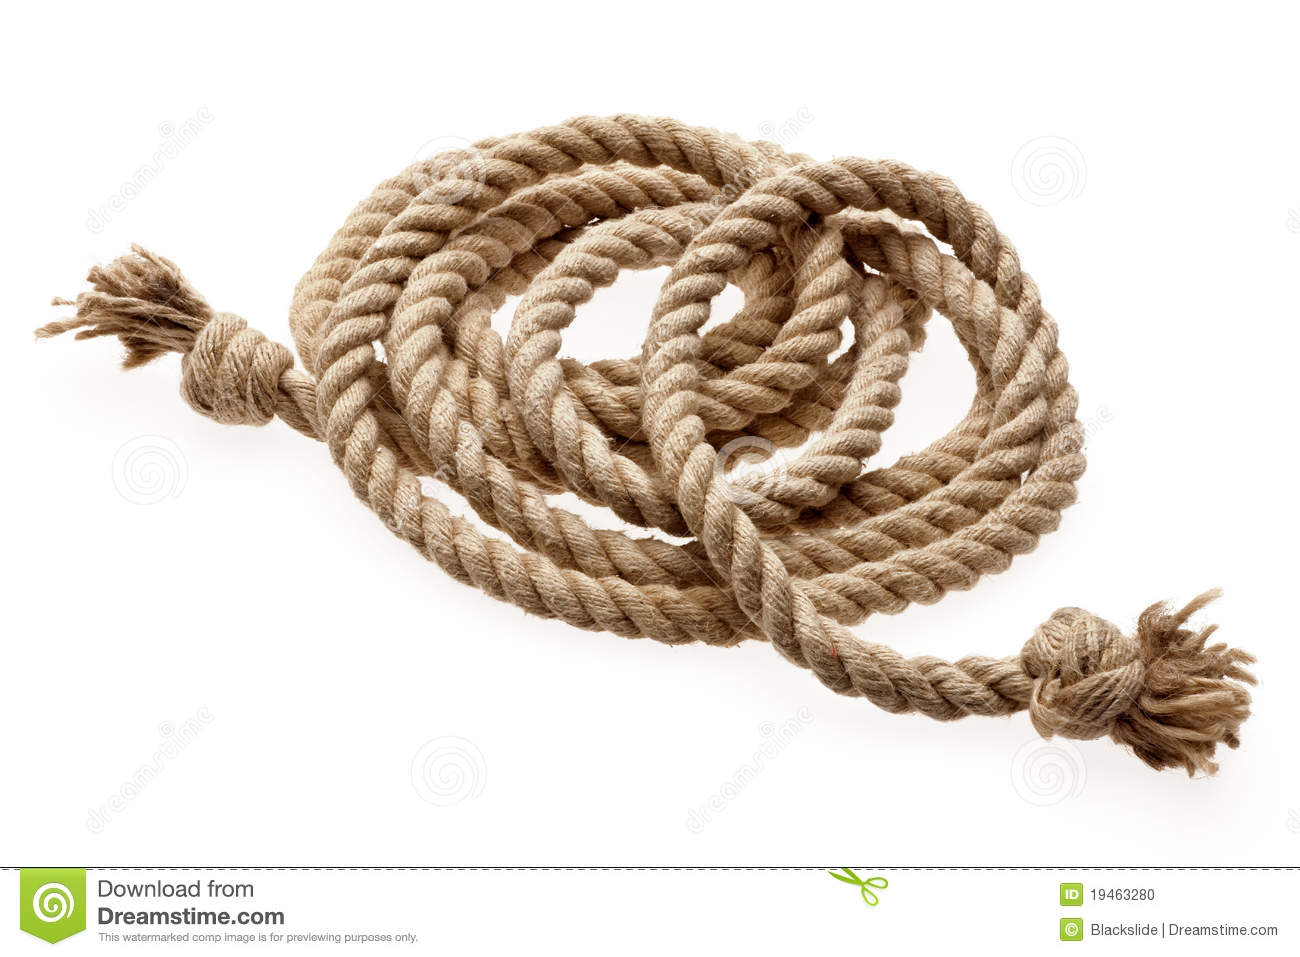 Amazing Rope Pictures & Backgrounds